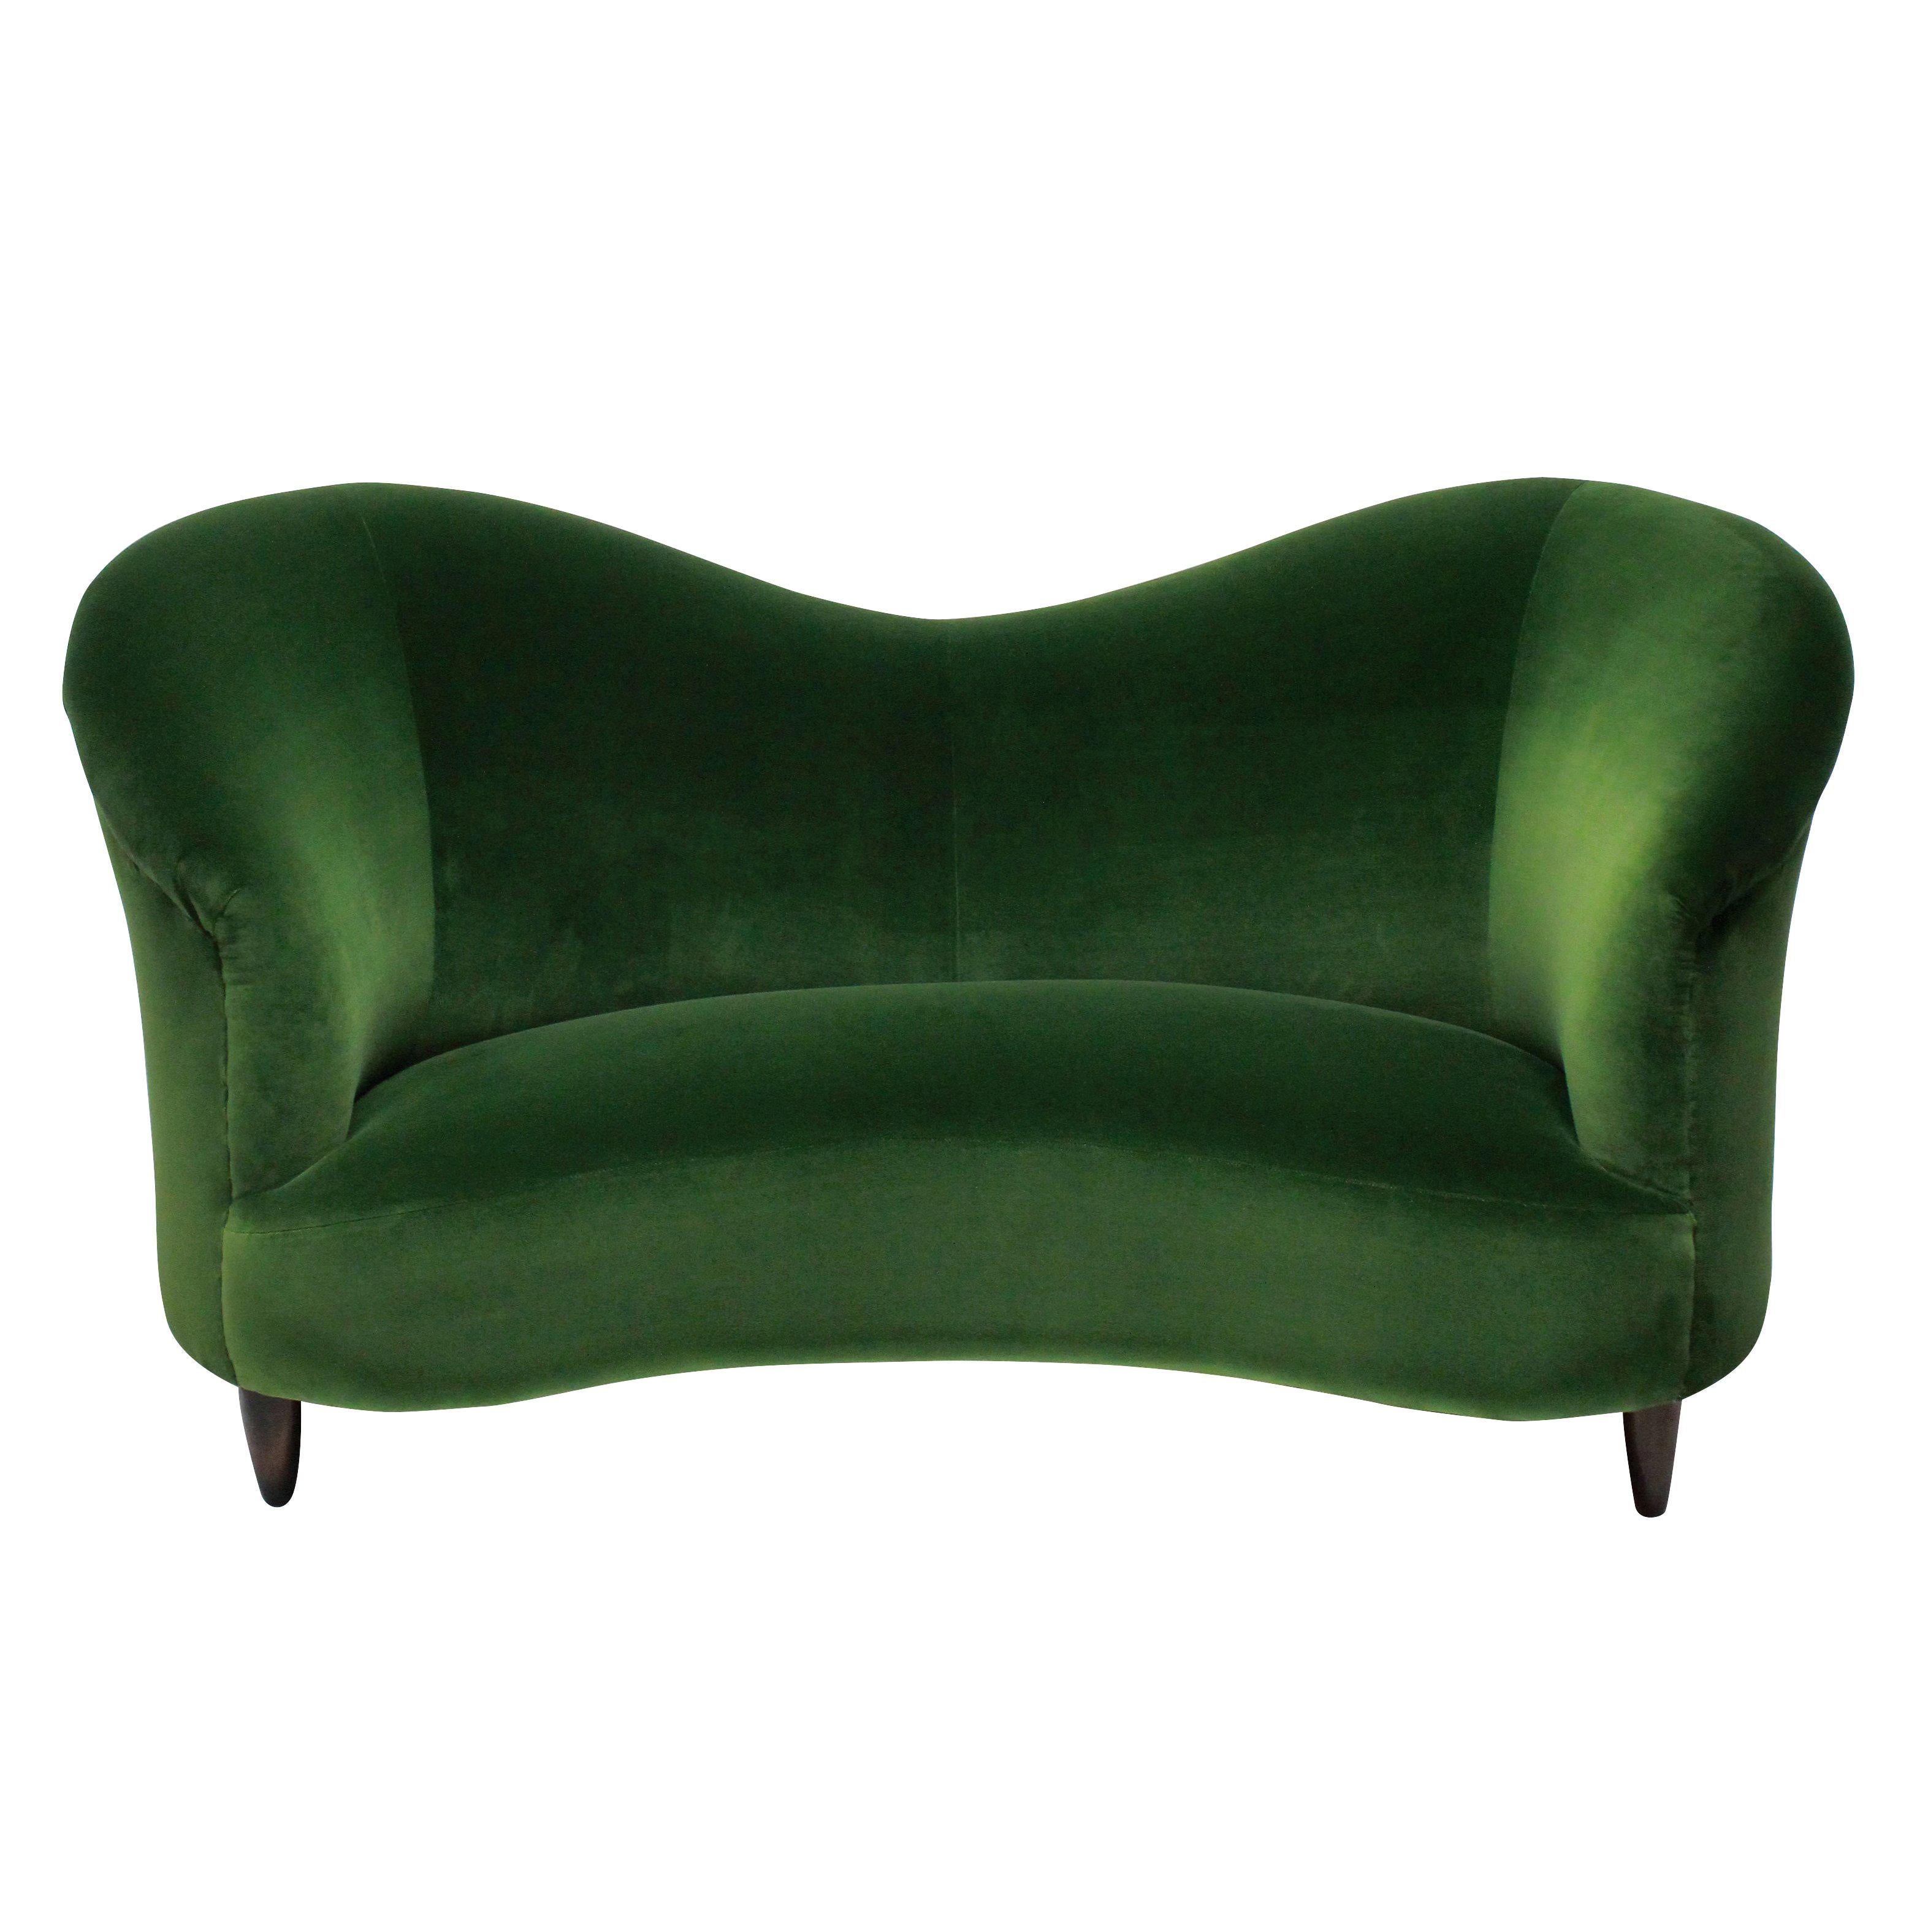 A fine Italian sculptural sofa attributed to Ico Parisi. Newly upholstered in emerald velvet.

 